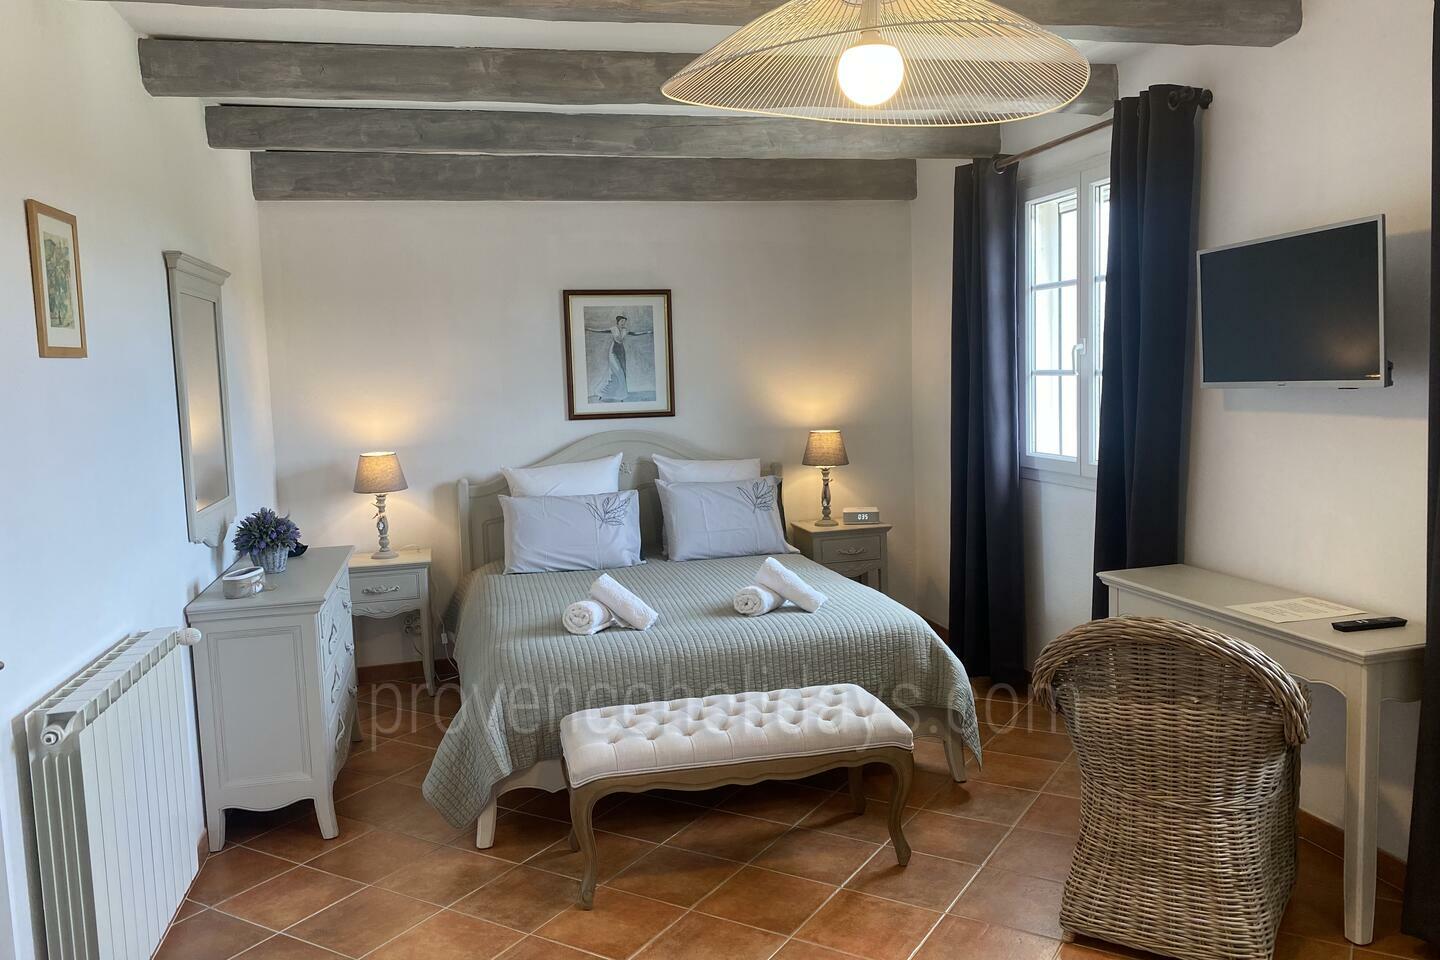 38 - Recently restored bastide with heated swimming pool: Villa: Bedroom